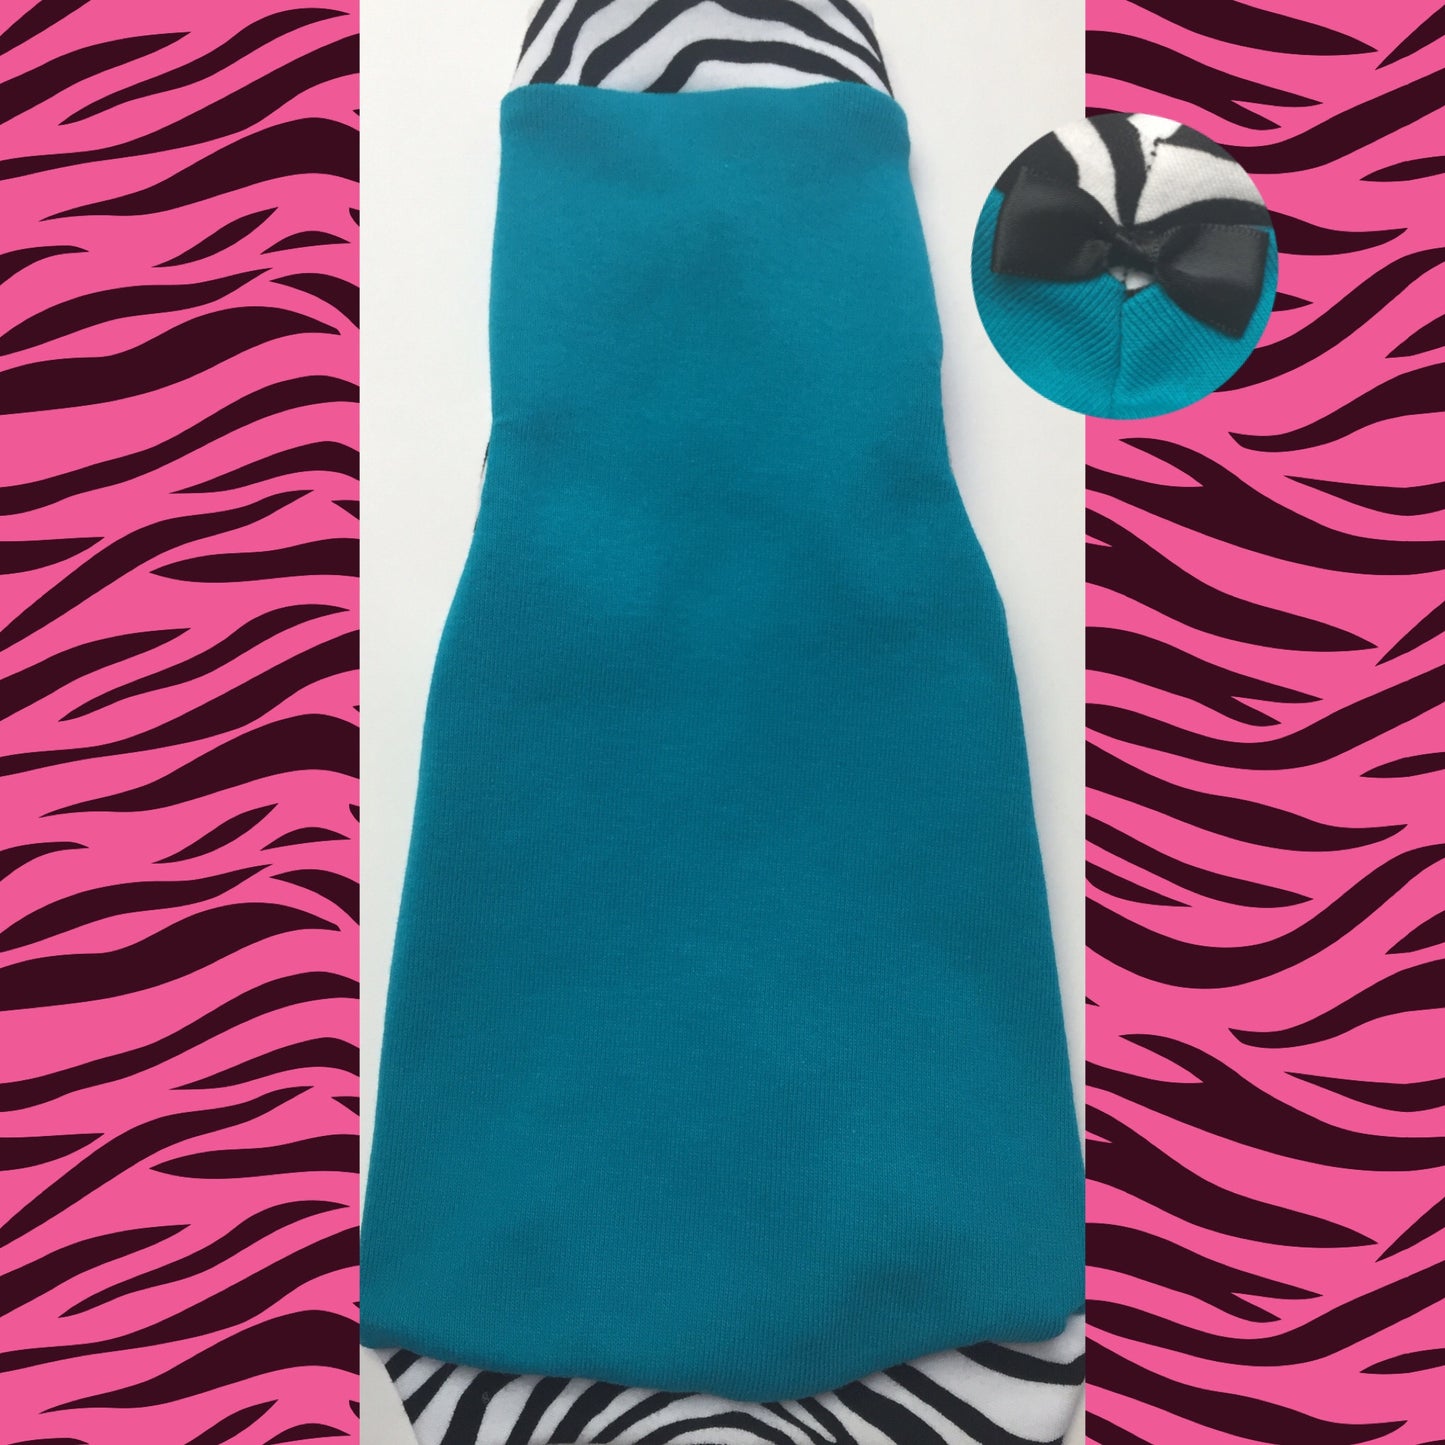 Turquoise Zebra with Bow Tie - Nudie Patooties